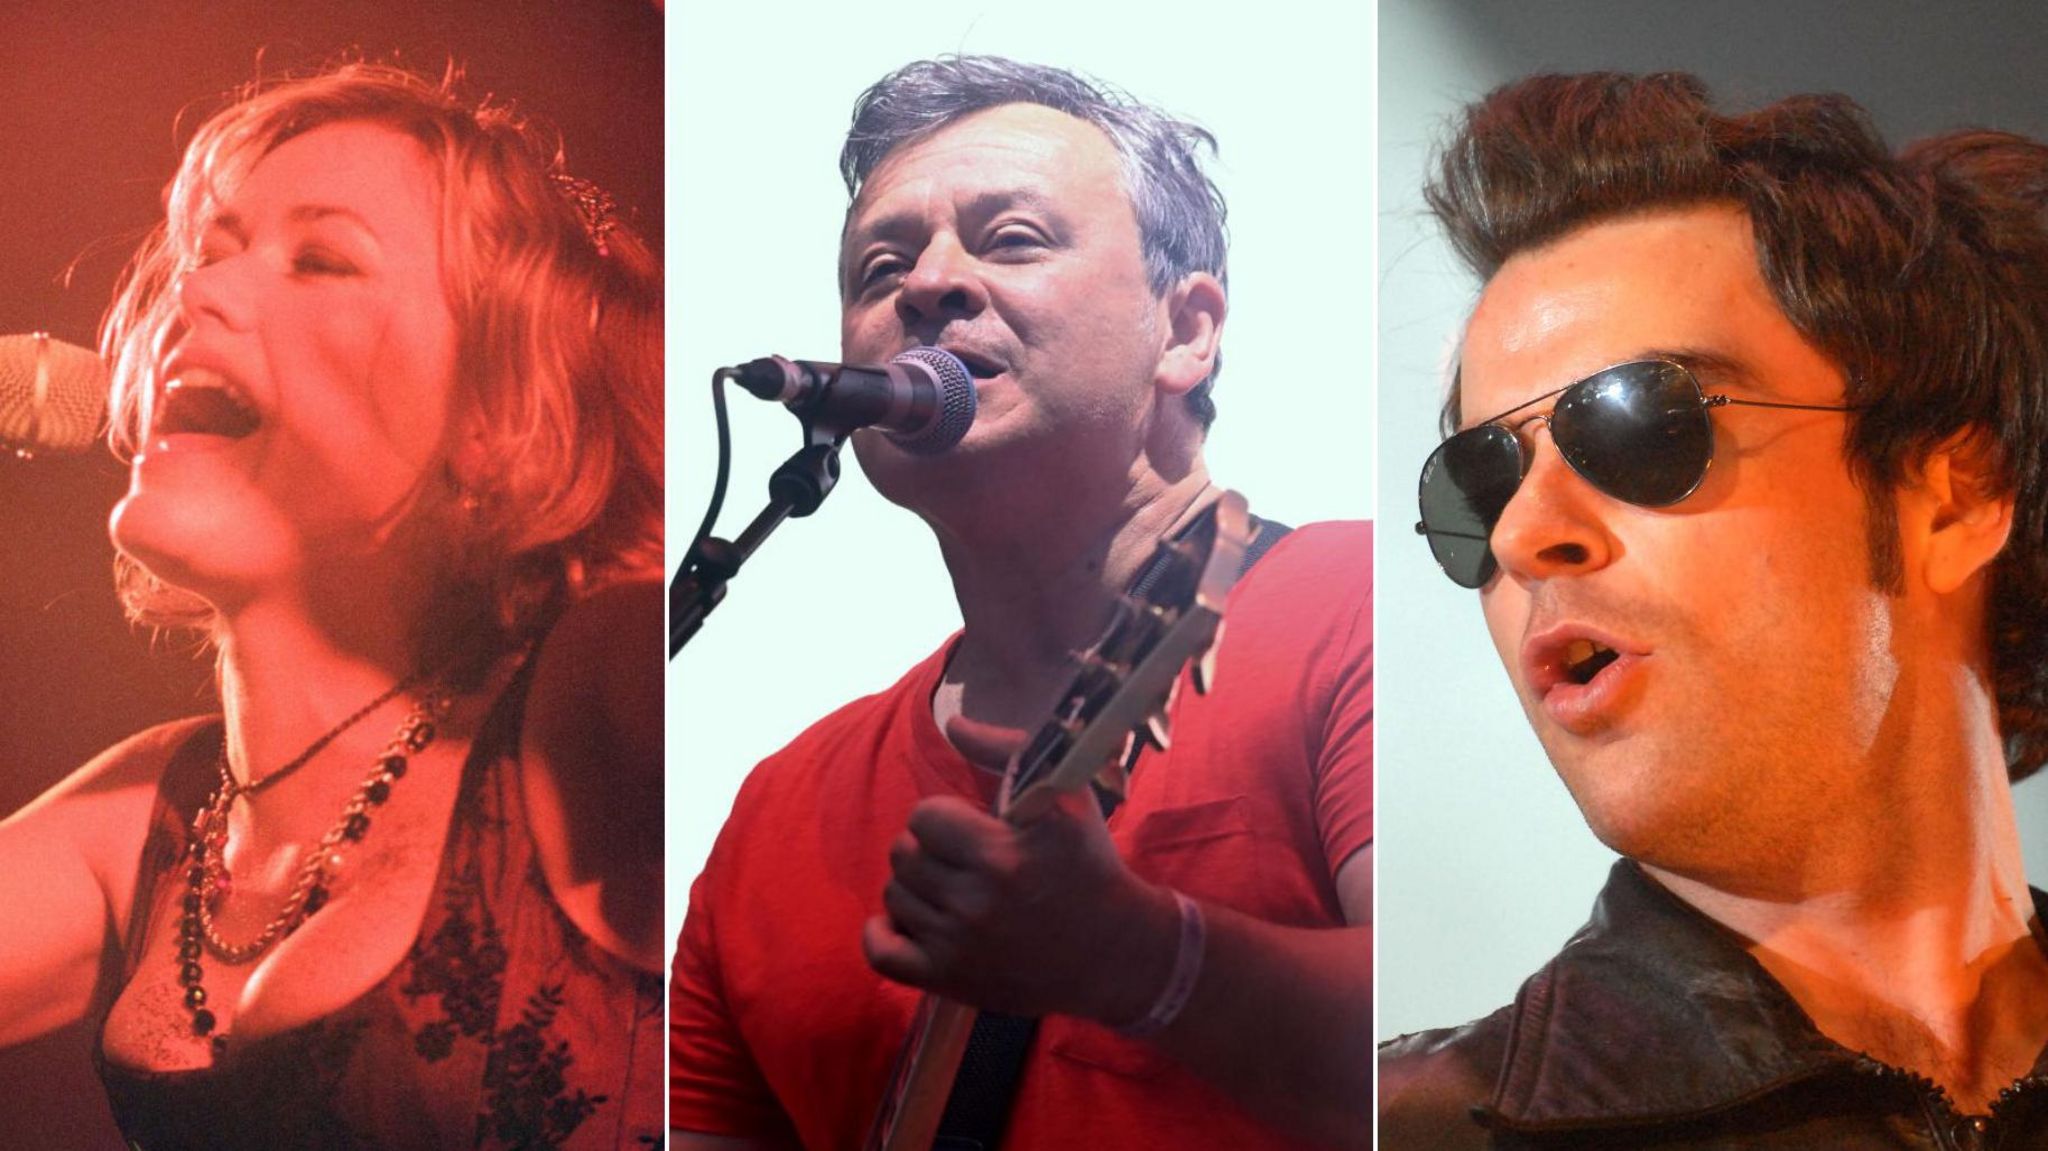 Cerys Matthews singing in Catatonia, James Dean Bradfield performing with Manic Street Preachers and Kelly Jones from Stereophonics